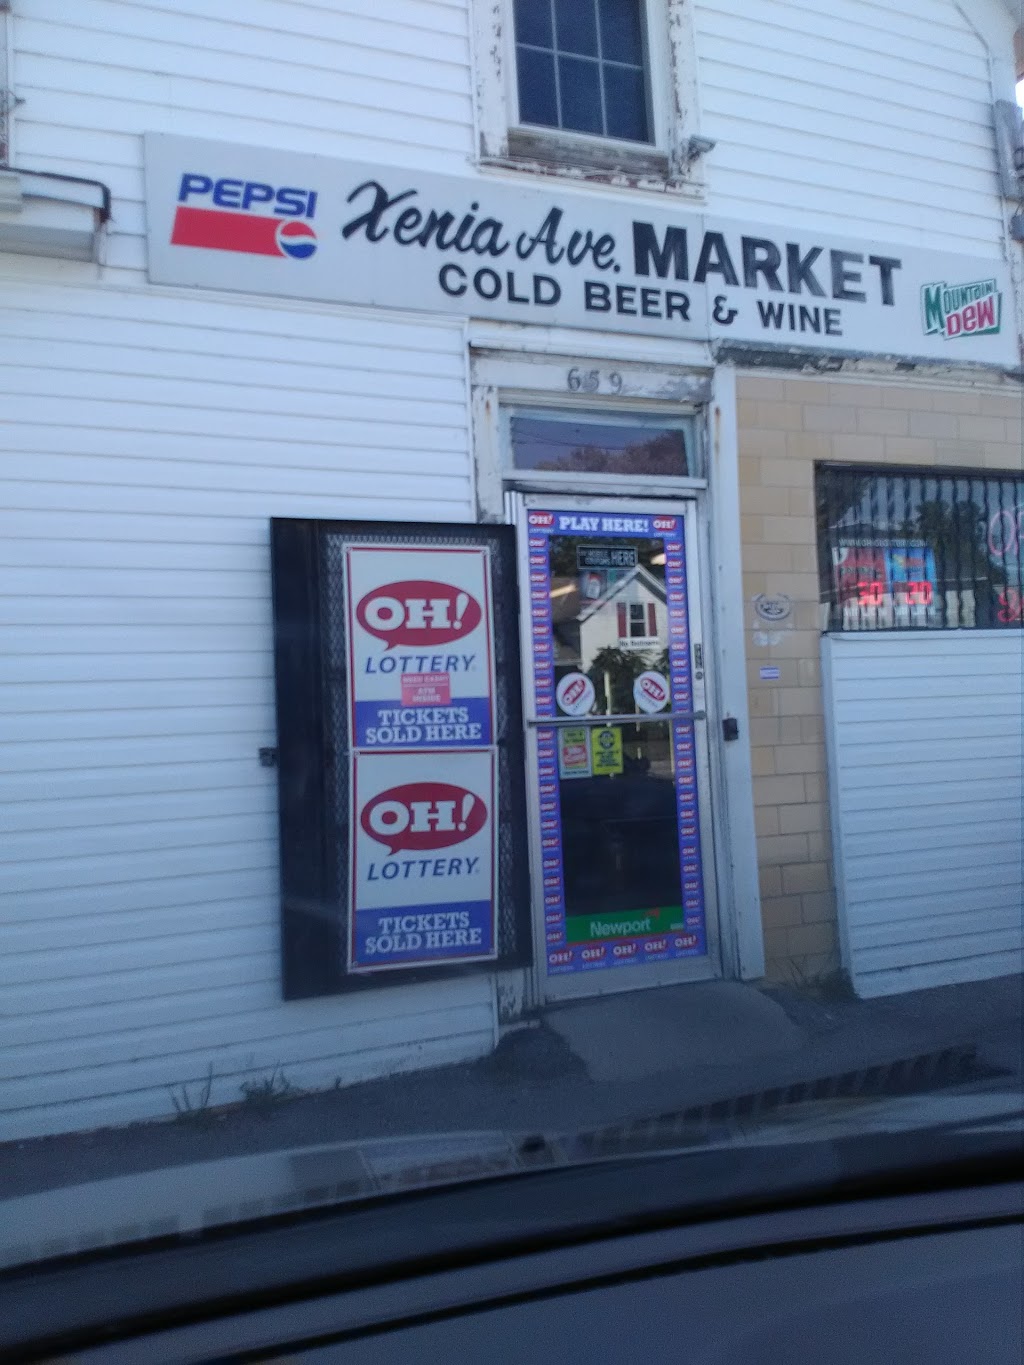 Xenia Avenue Market- Carry out | 659 Xenia Ave, Wilmington, OH 45177 | Phone: (937) 382-2285